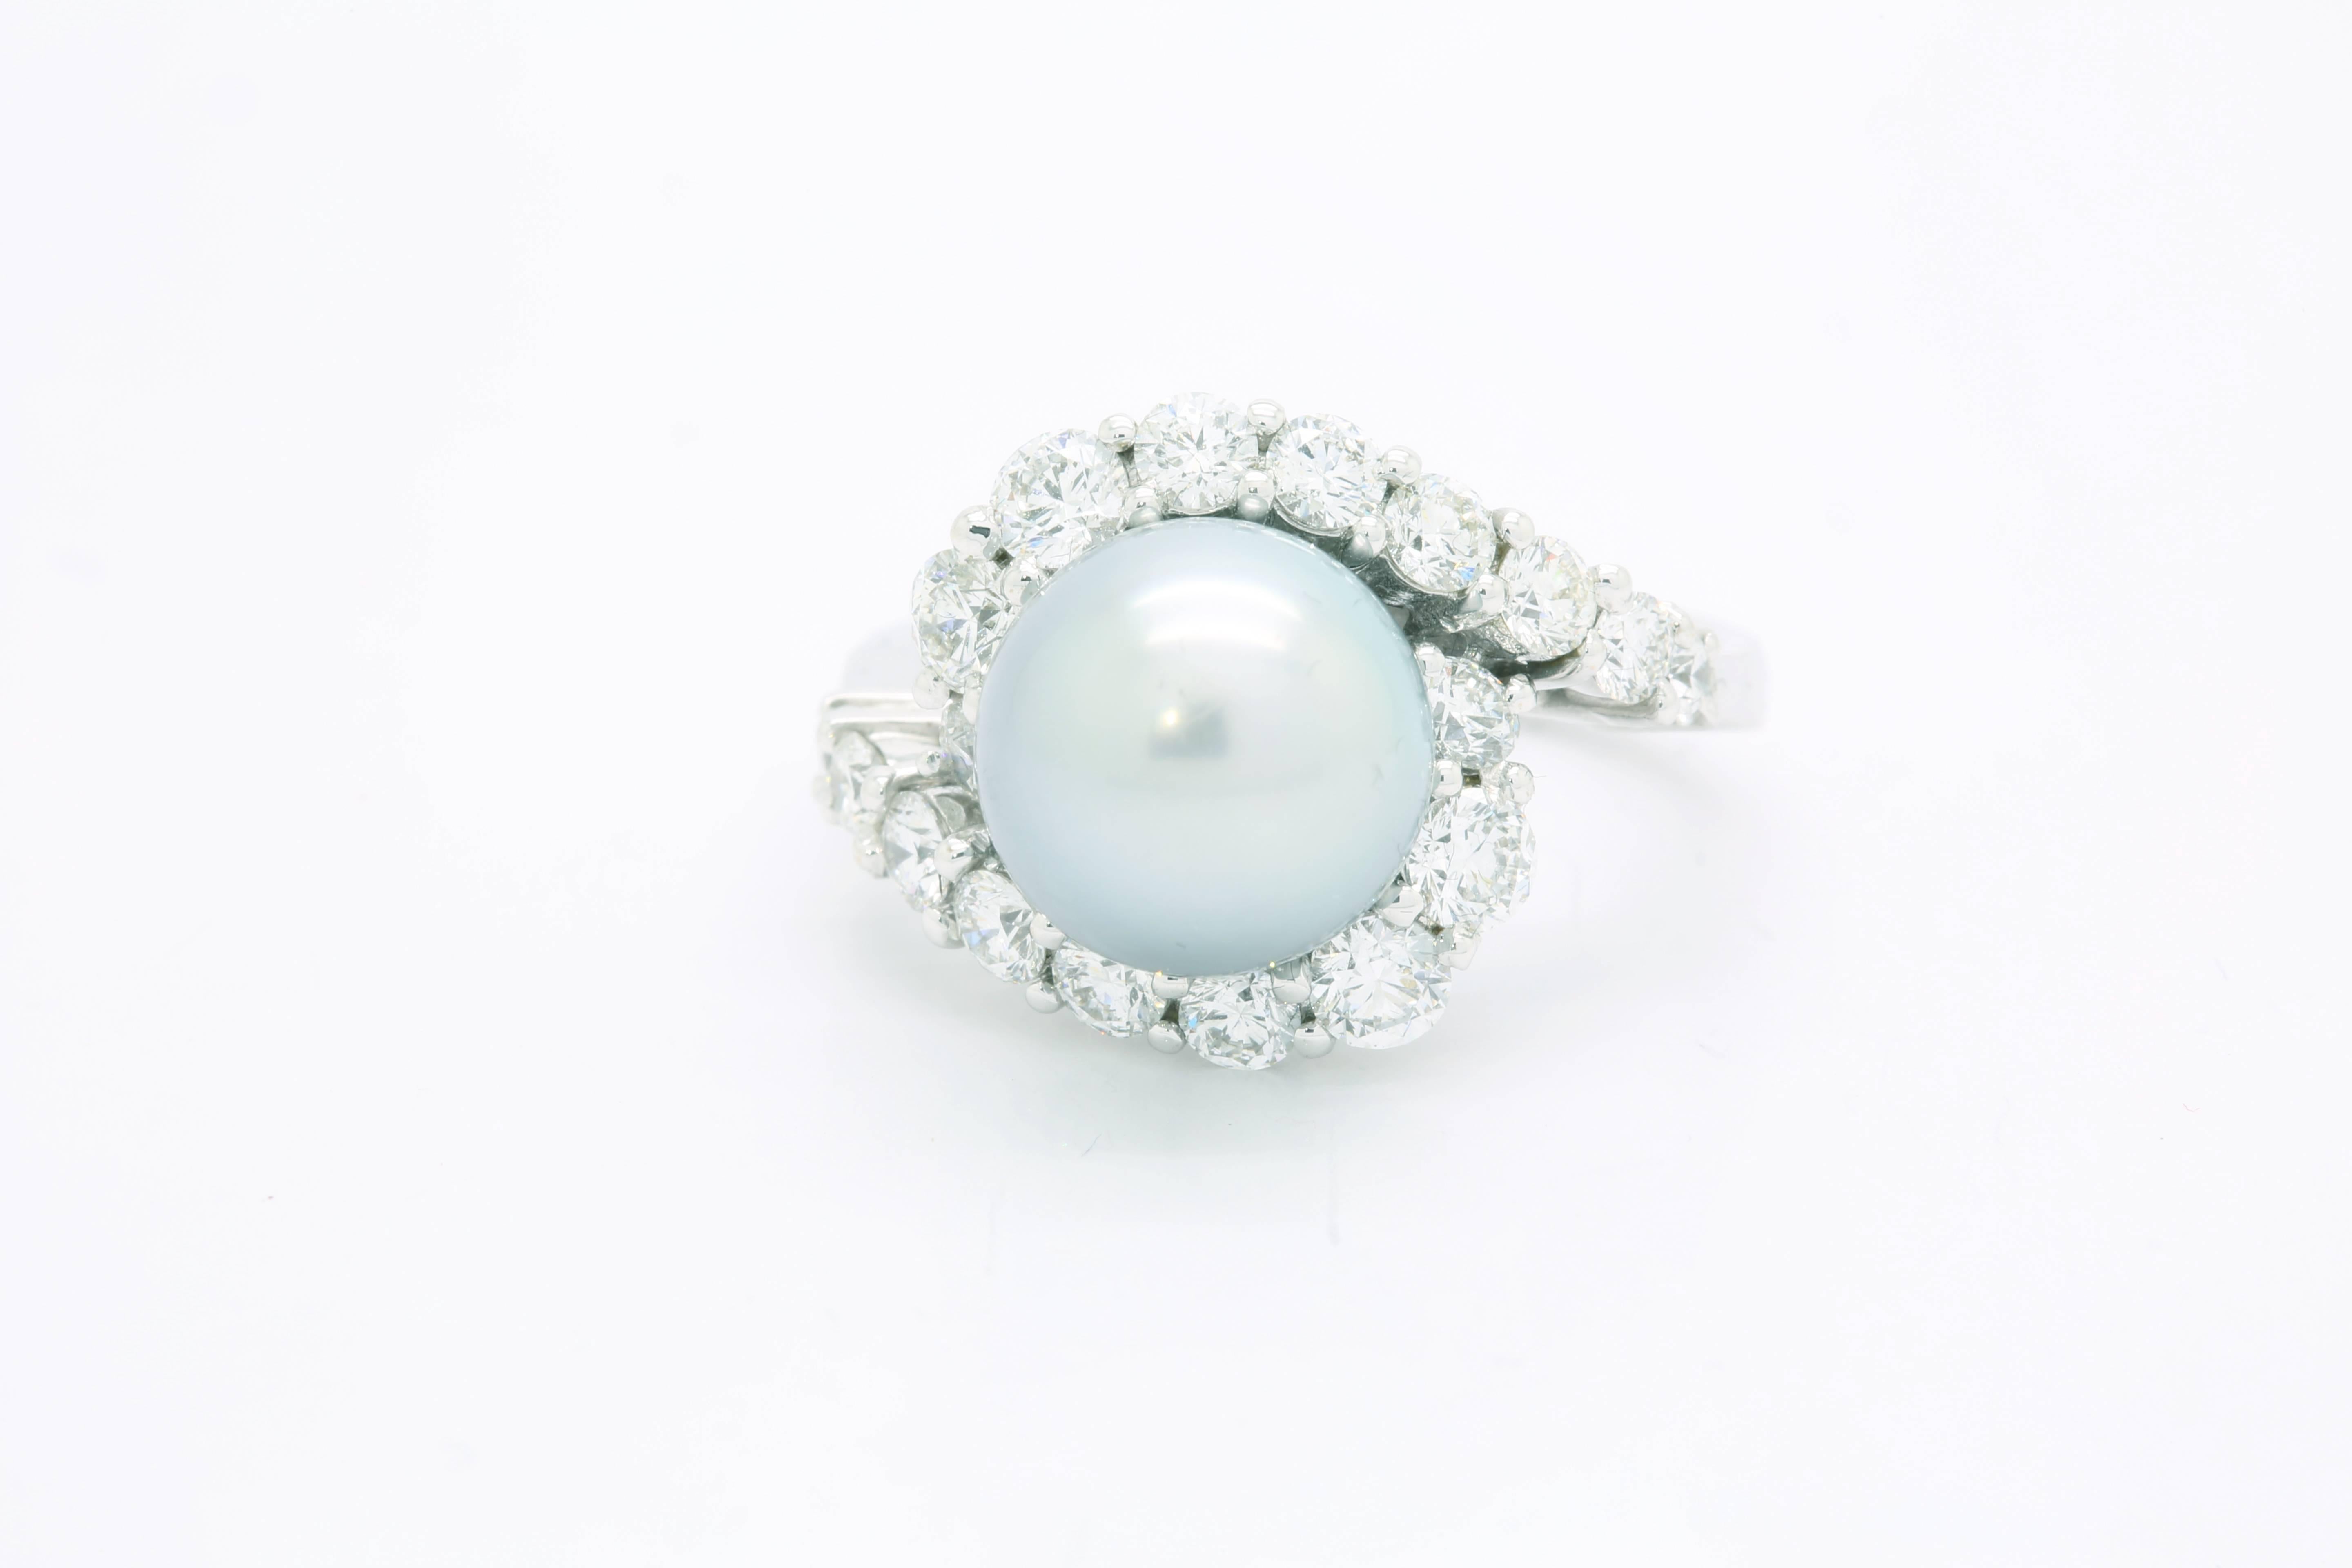 A Silver gray Tahitian pearl and white diamonds ring from the collection 